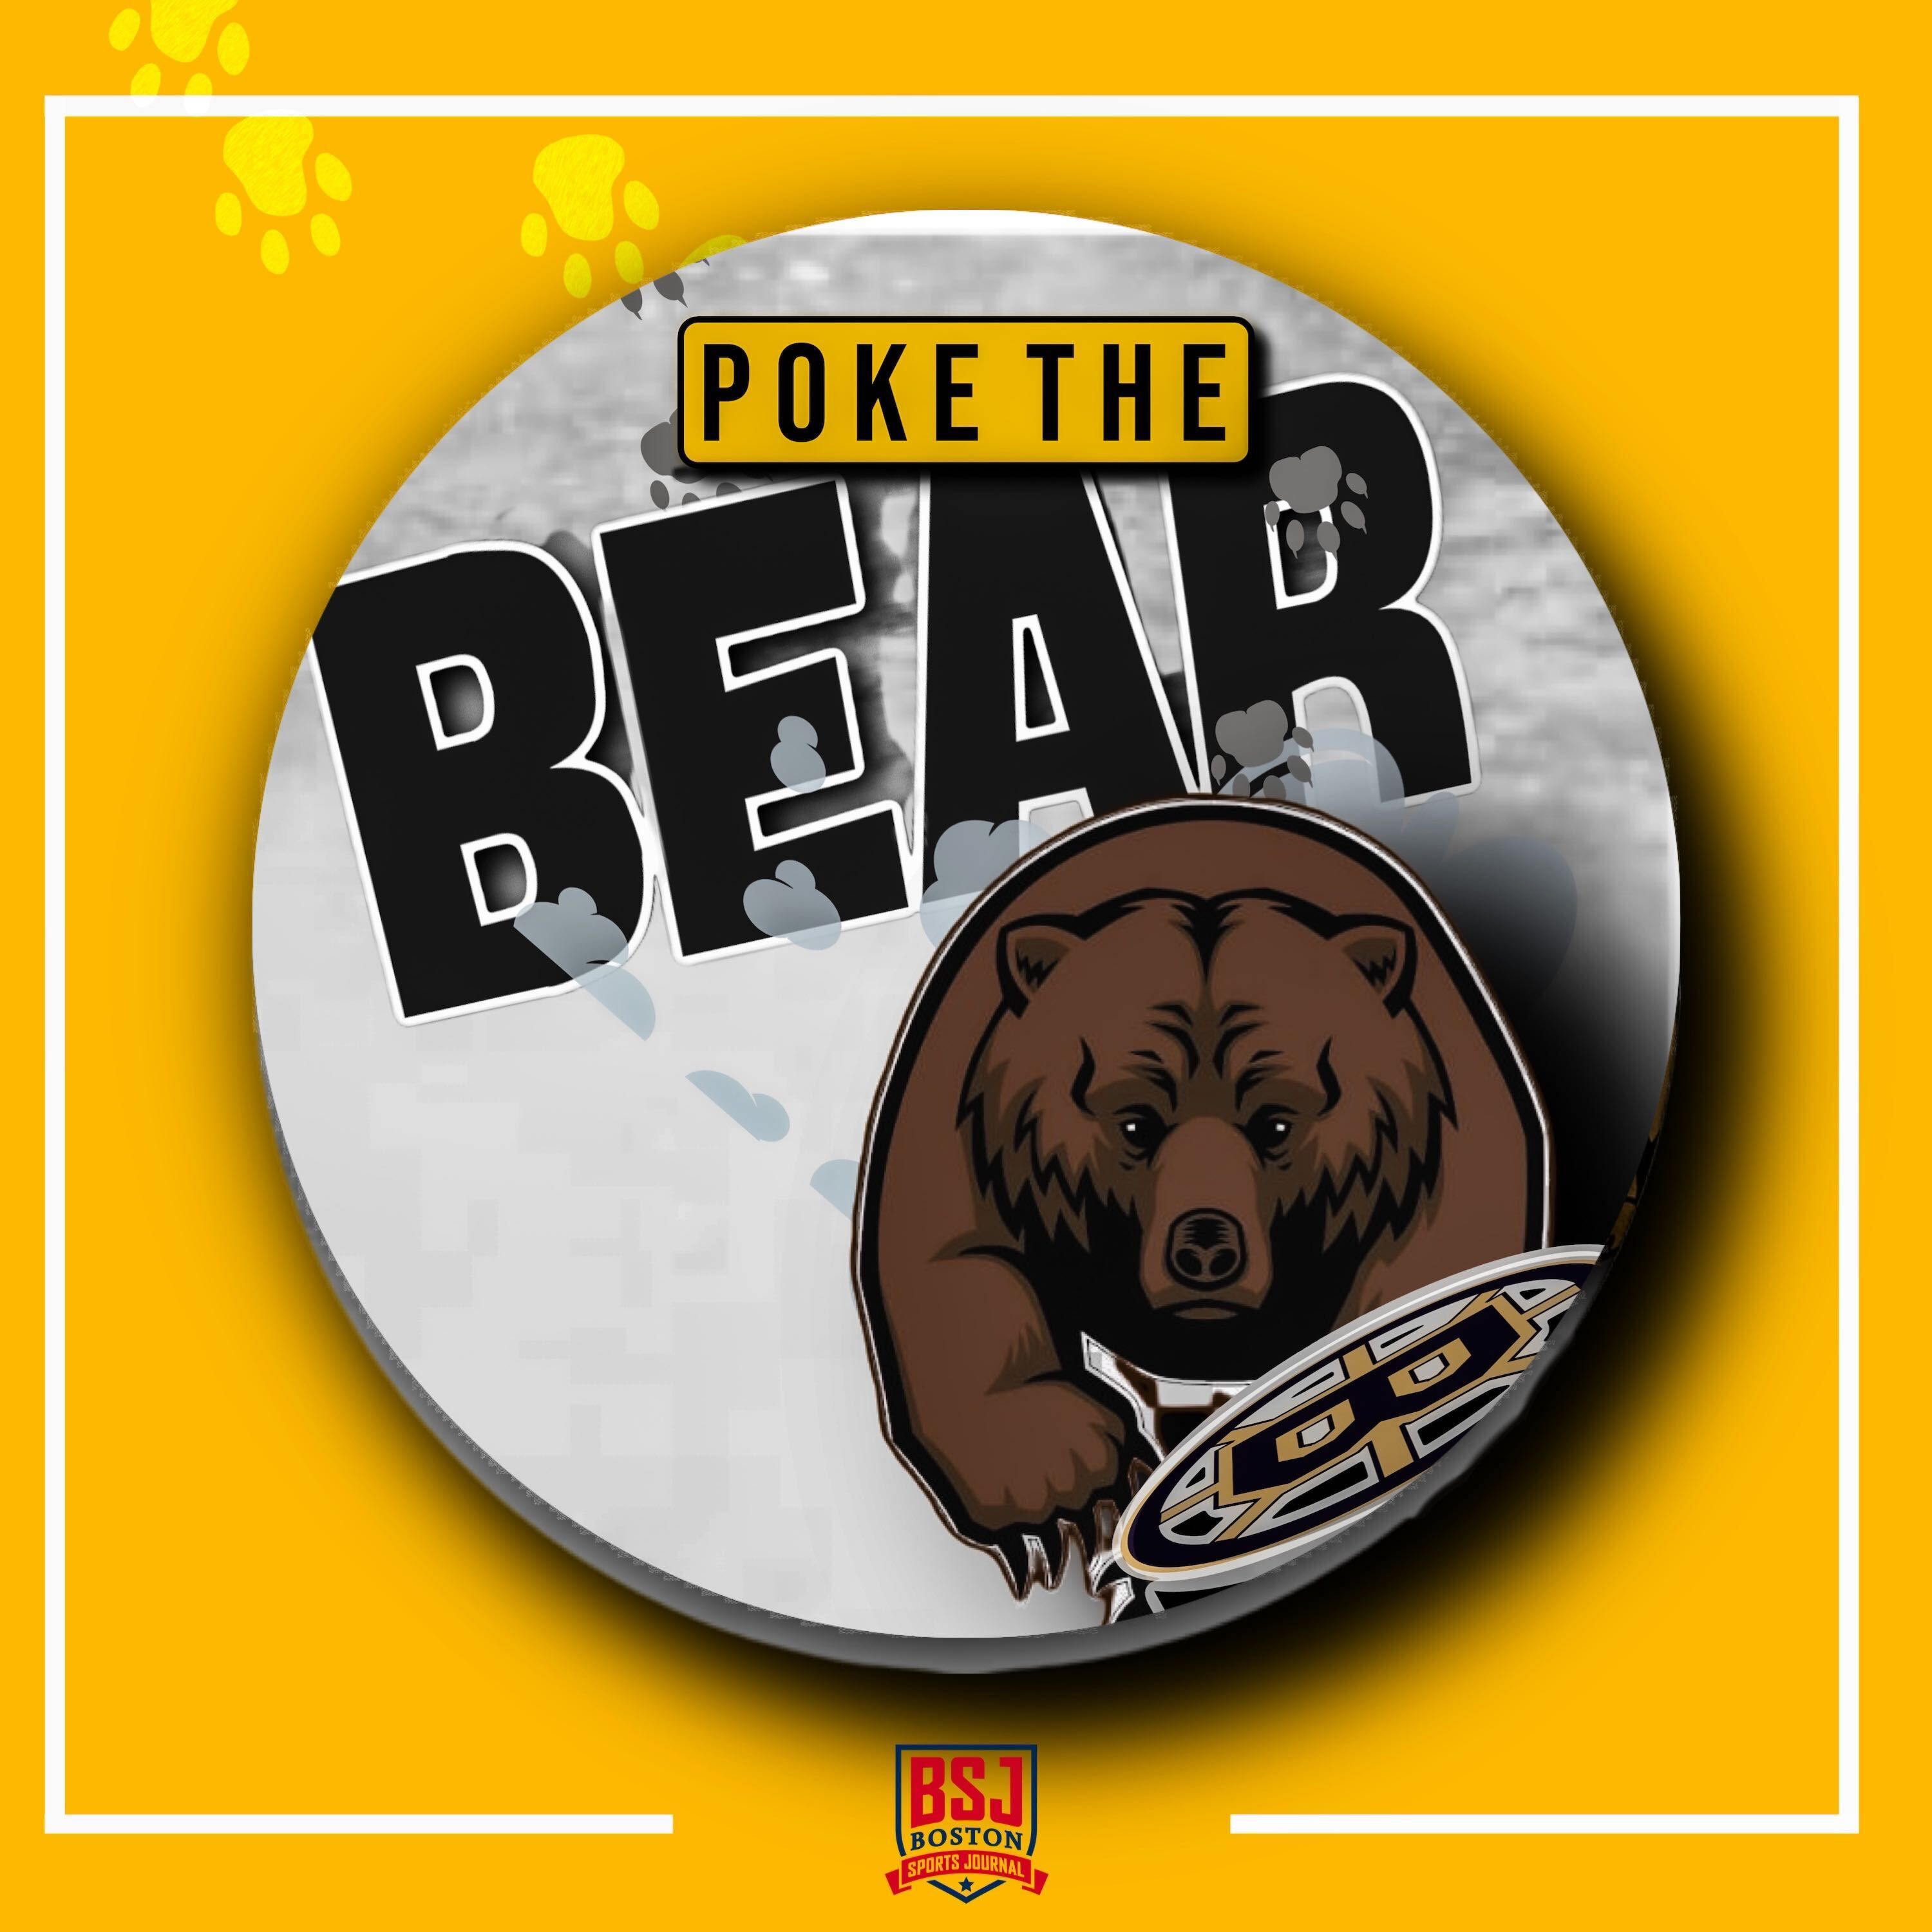 A highlight from Bruce Cassidy to Vegas & What Should the Bruins Look For in Next Head Coach? | Poke the Bear w/ Conor Ryan